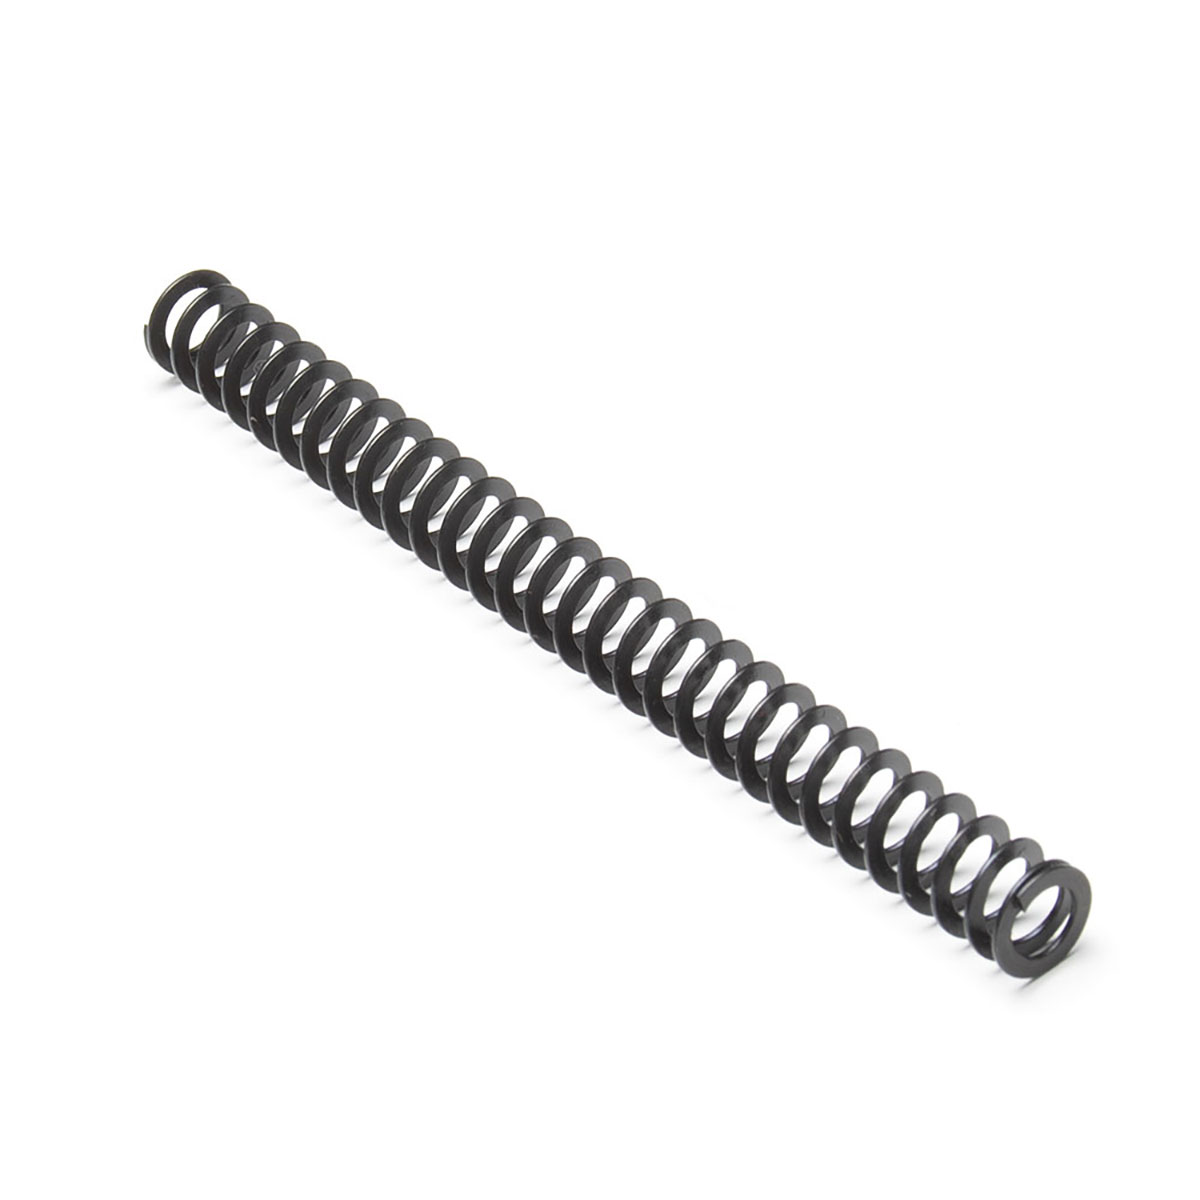 ED BROWN - 1911 9MM LUGER FLAT WIRE RECOIL SPRING